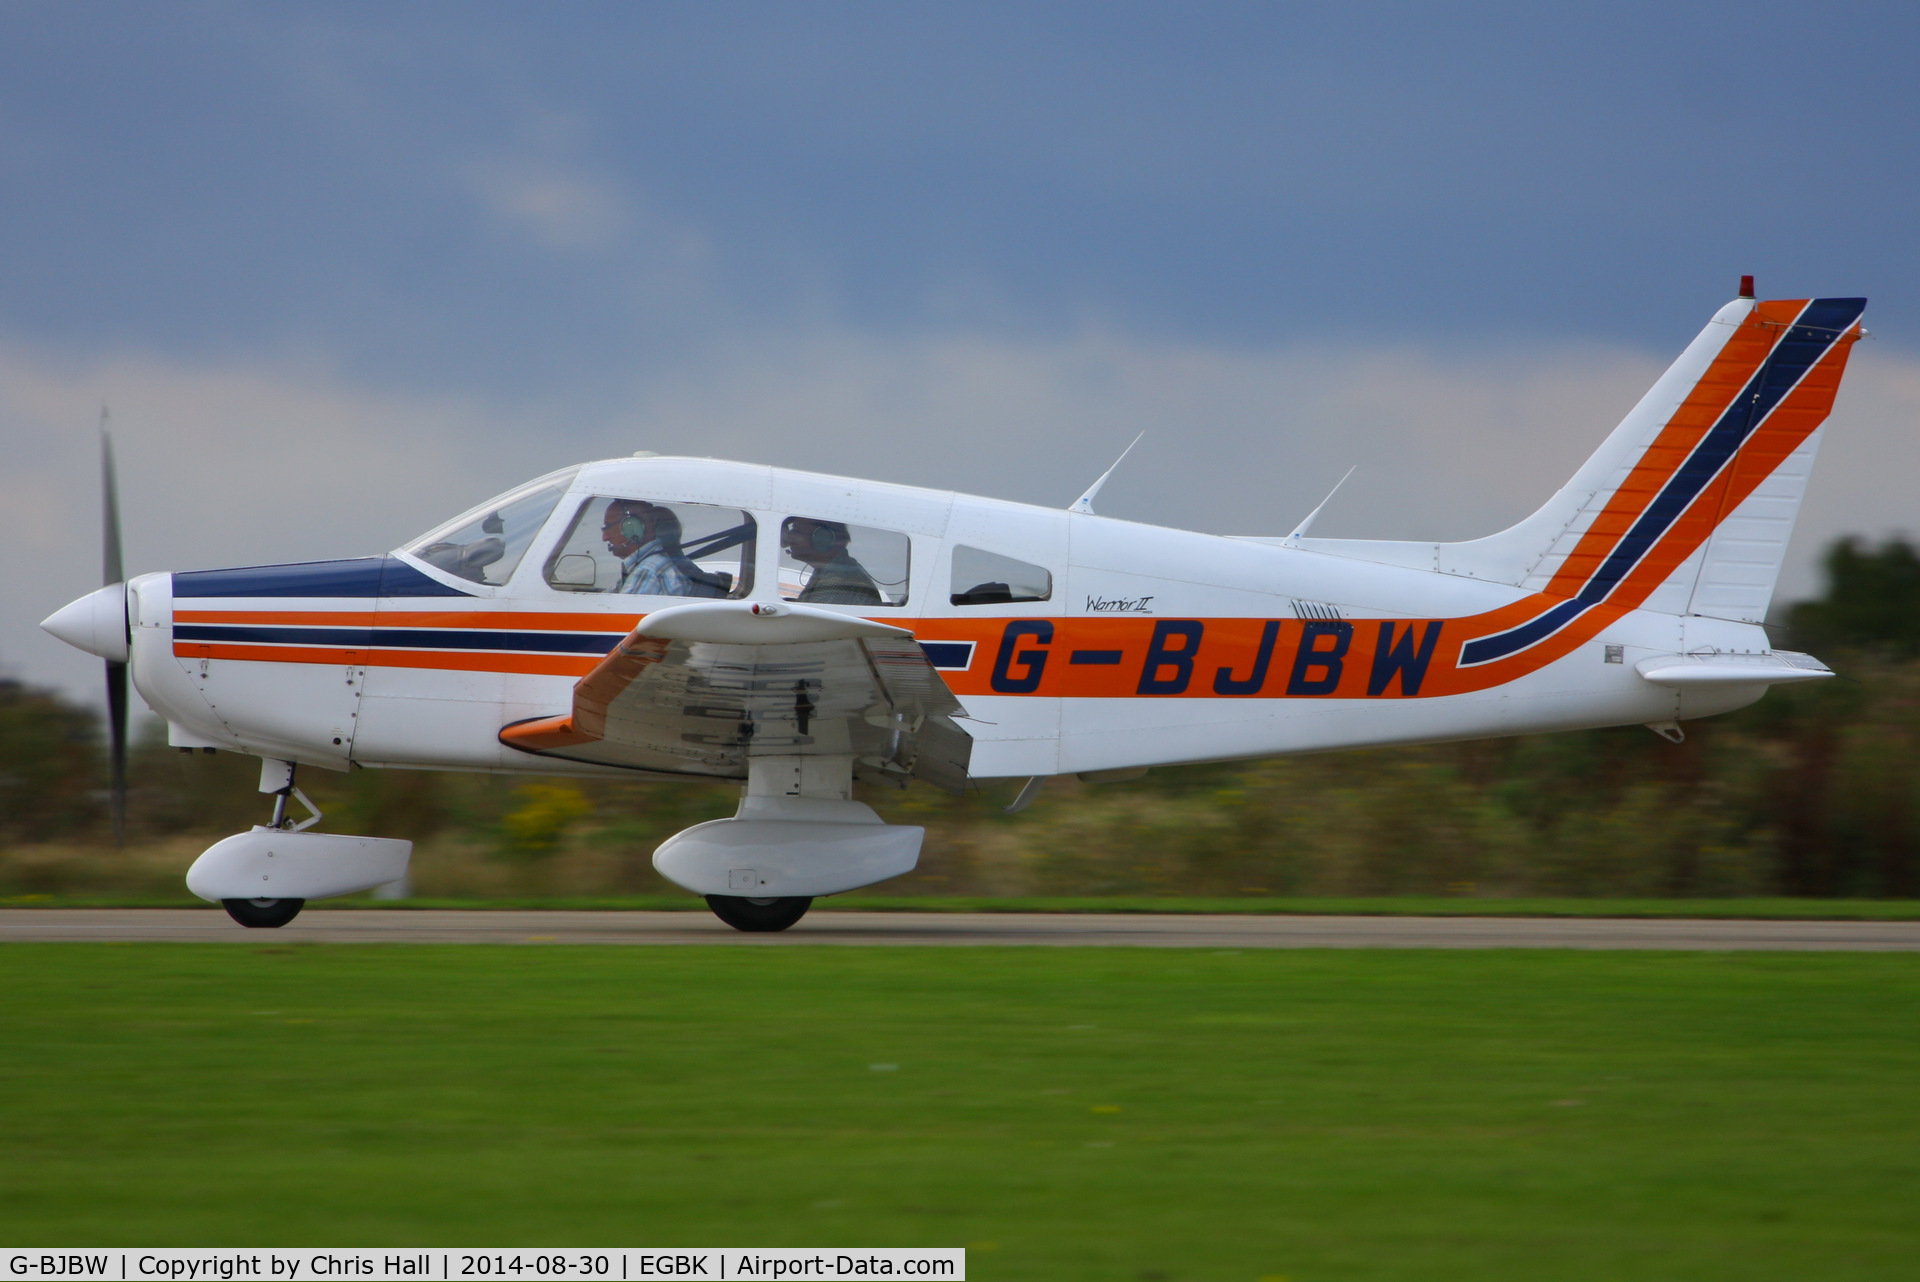 G-BJBW, 1981 Piper PA-28-161 Cherokee Warrior II C/N 28-8116280, at the LAA Rally 2014, Sywell